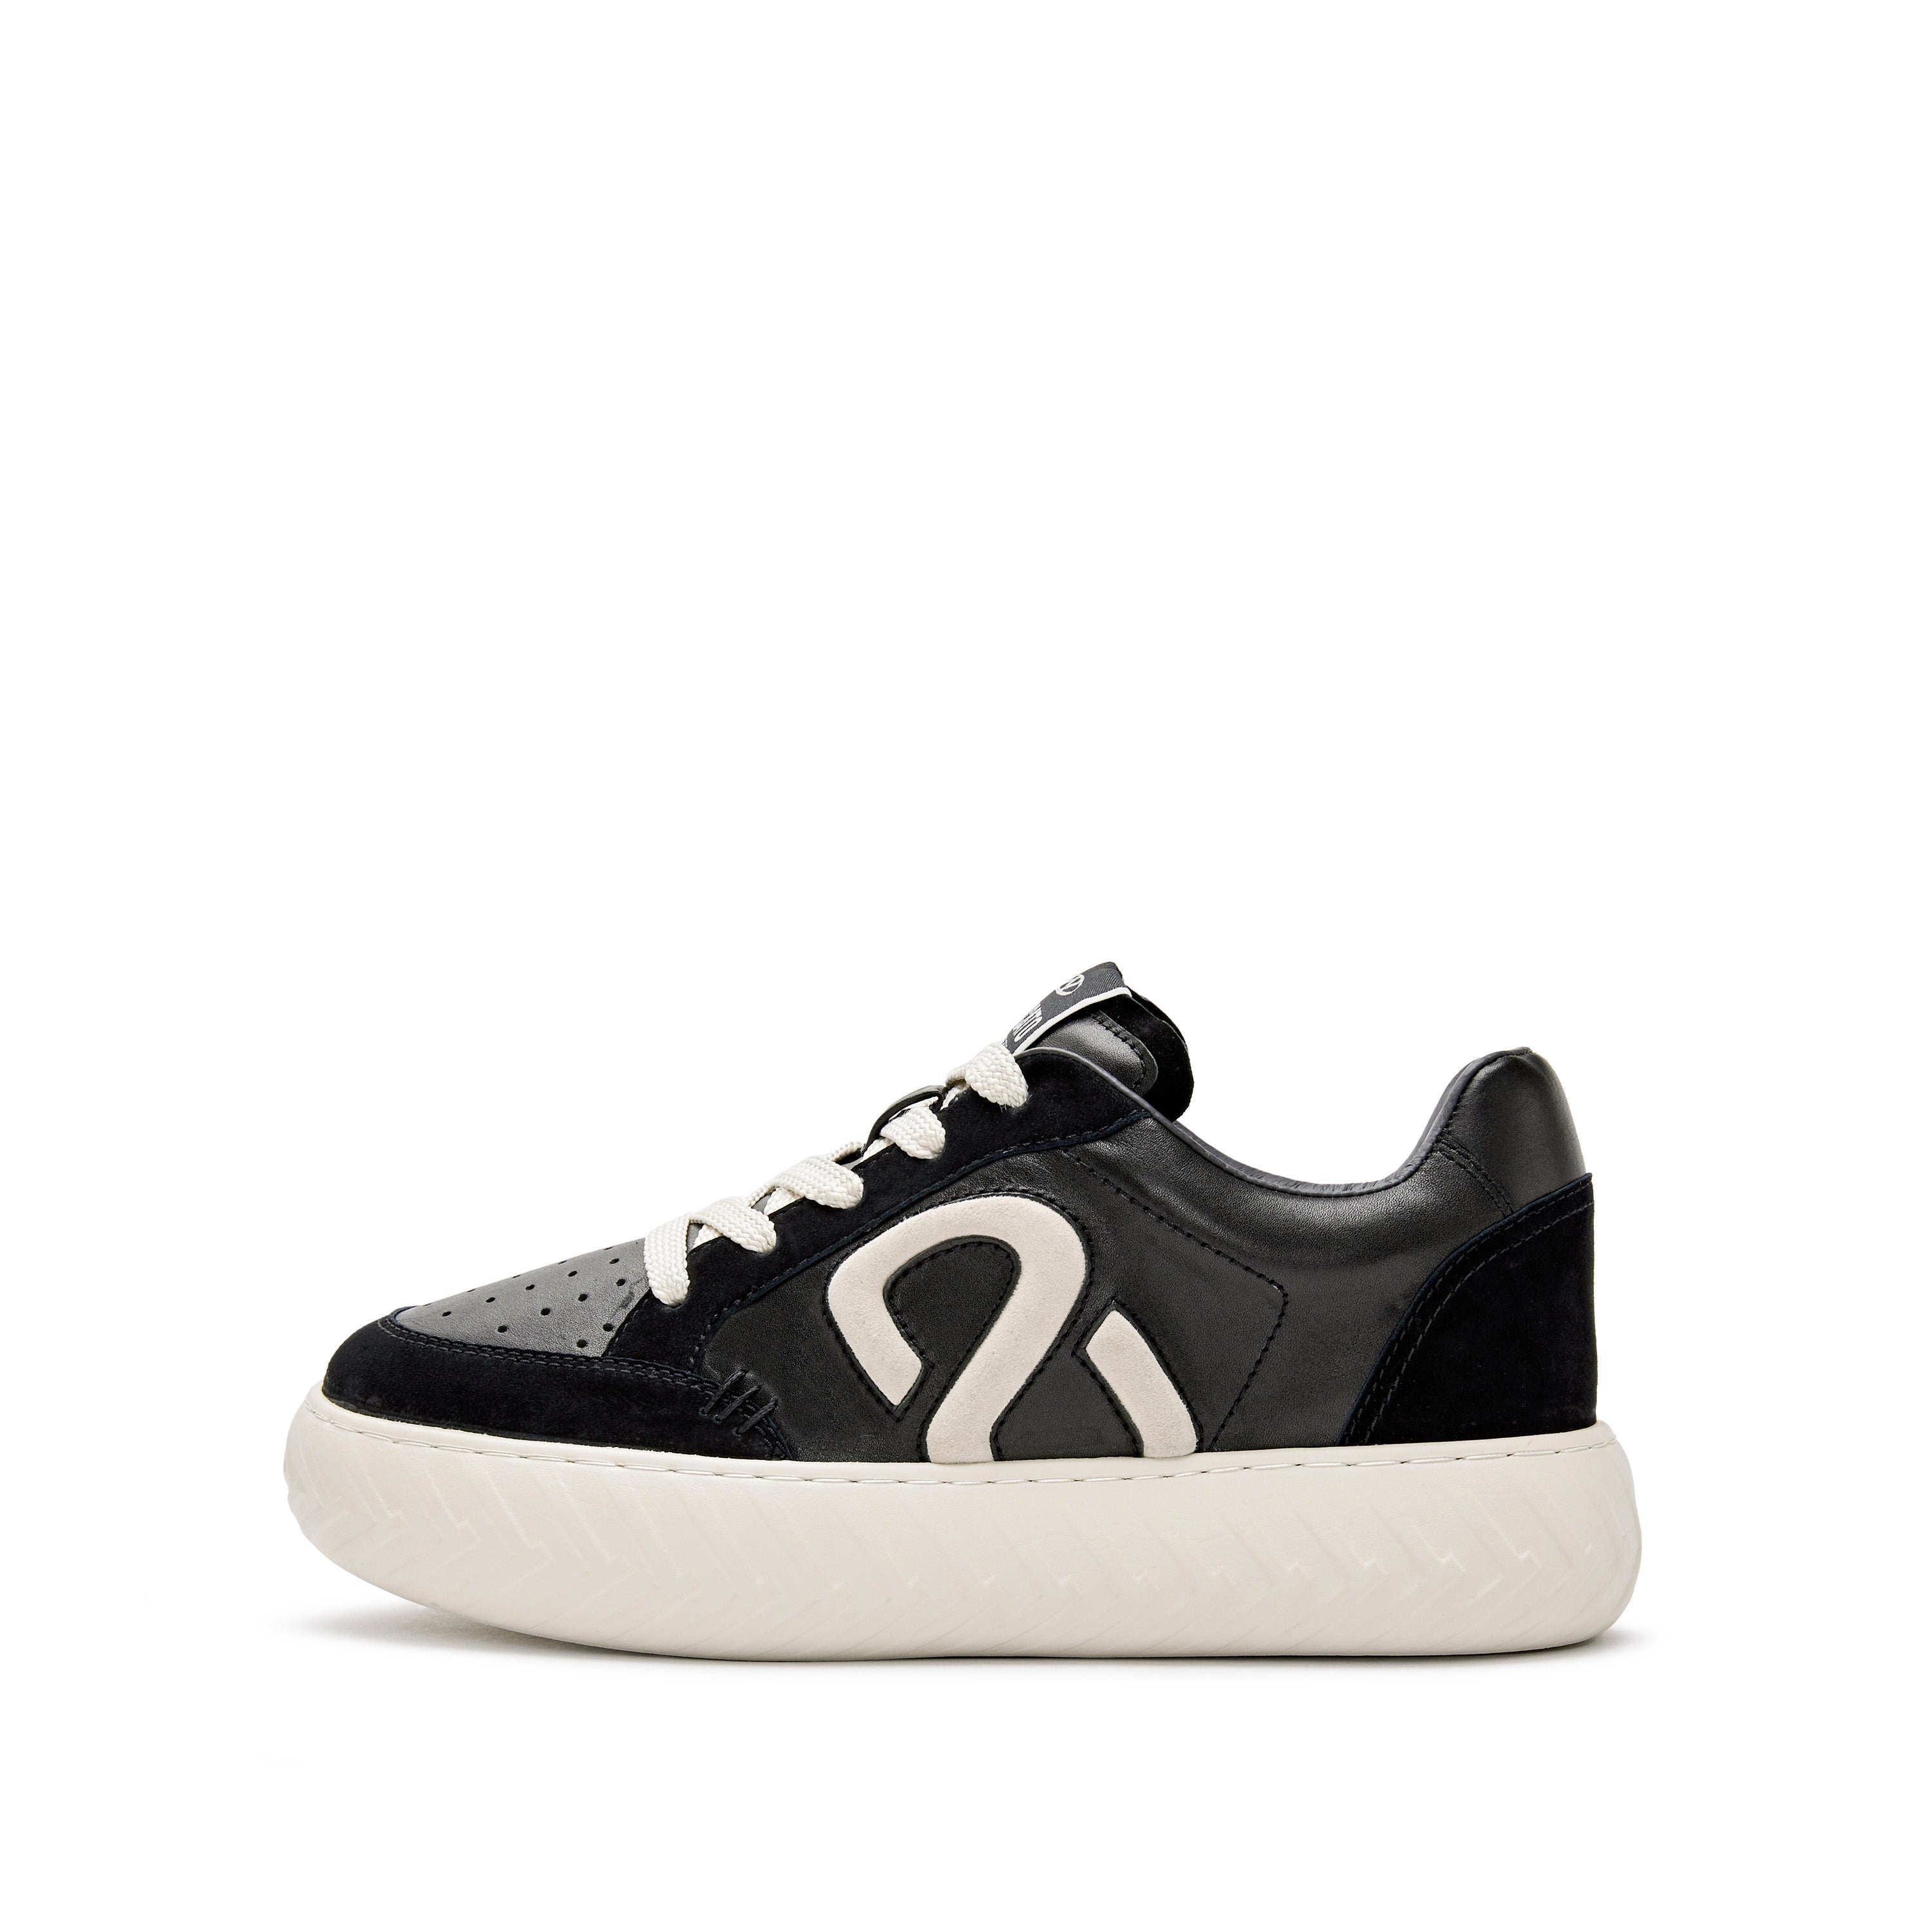 Black Wheel Platfrom Leather Sneakers